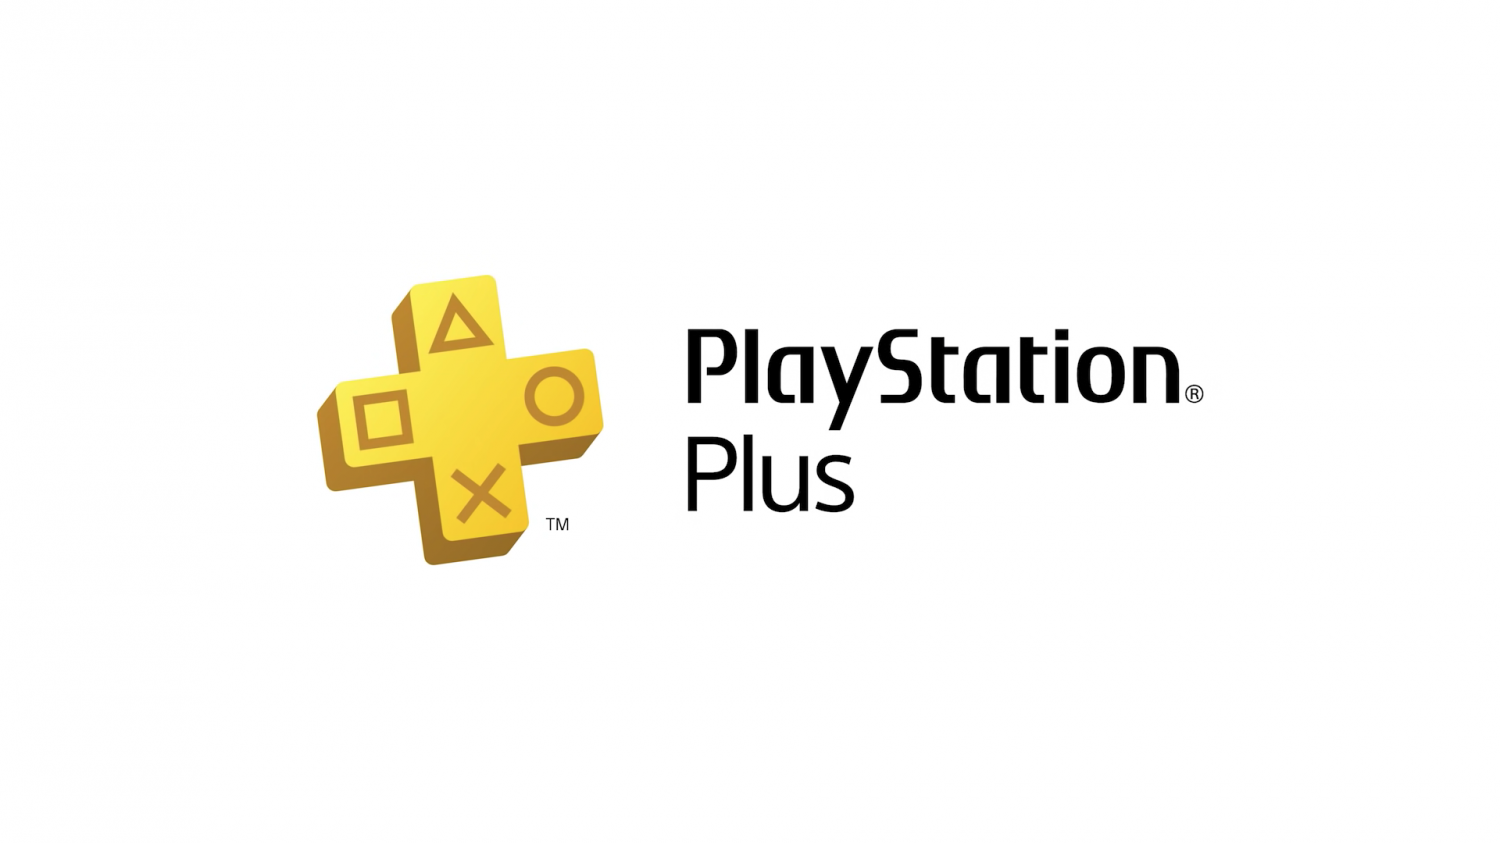 PS Plus December Countdown: What Time Is PS4 & PS5 Free Games